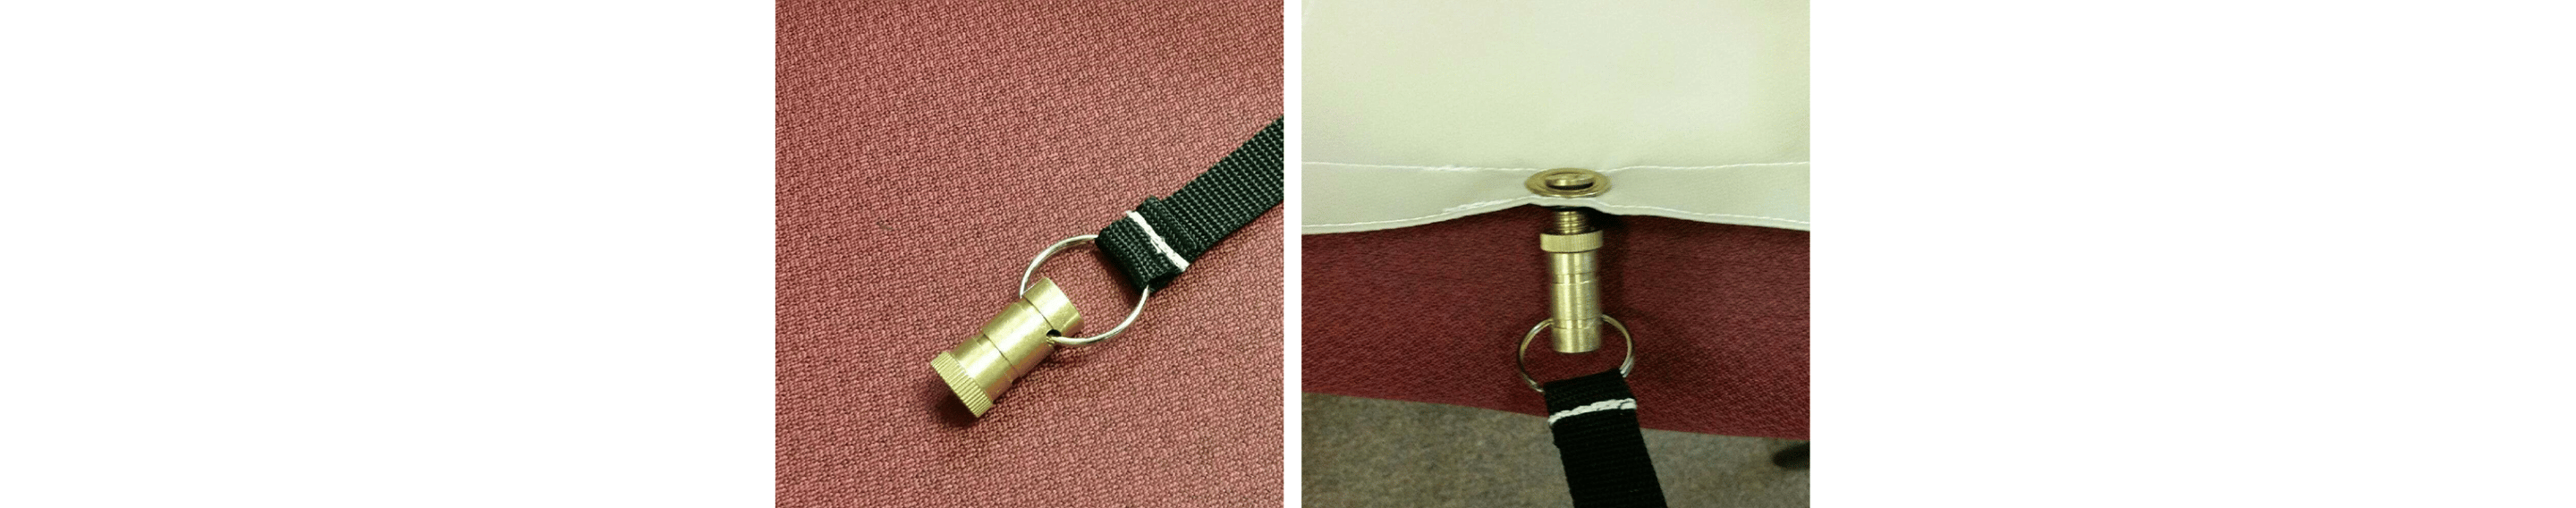 Pool Cover Straps